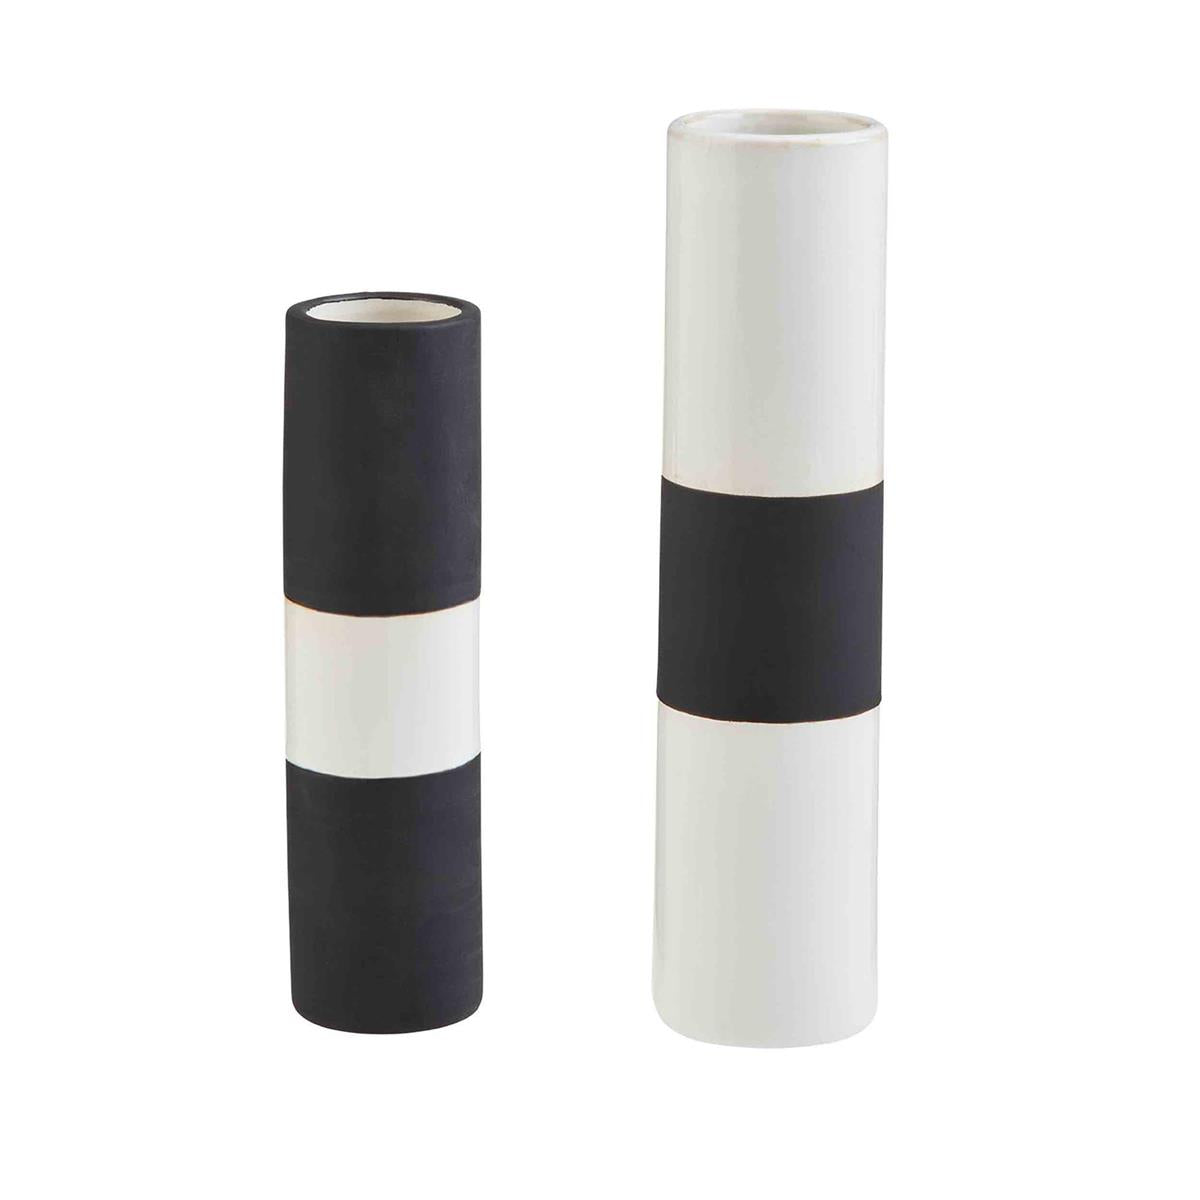 2 sizes of vases, small vase is black with white stripe around the center, large vase is white with black stripe around the center.